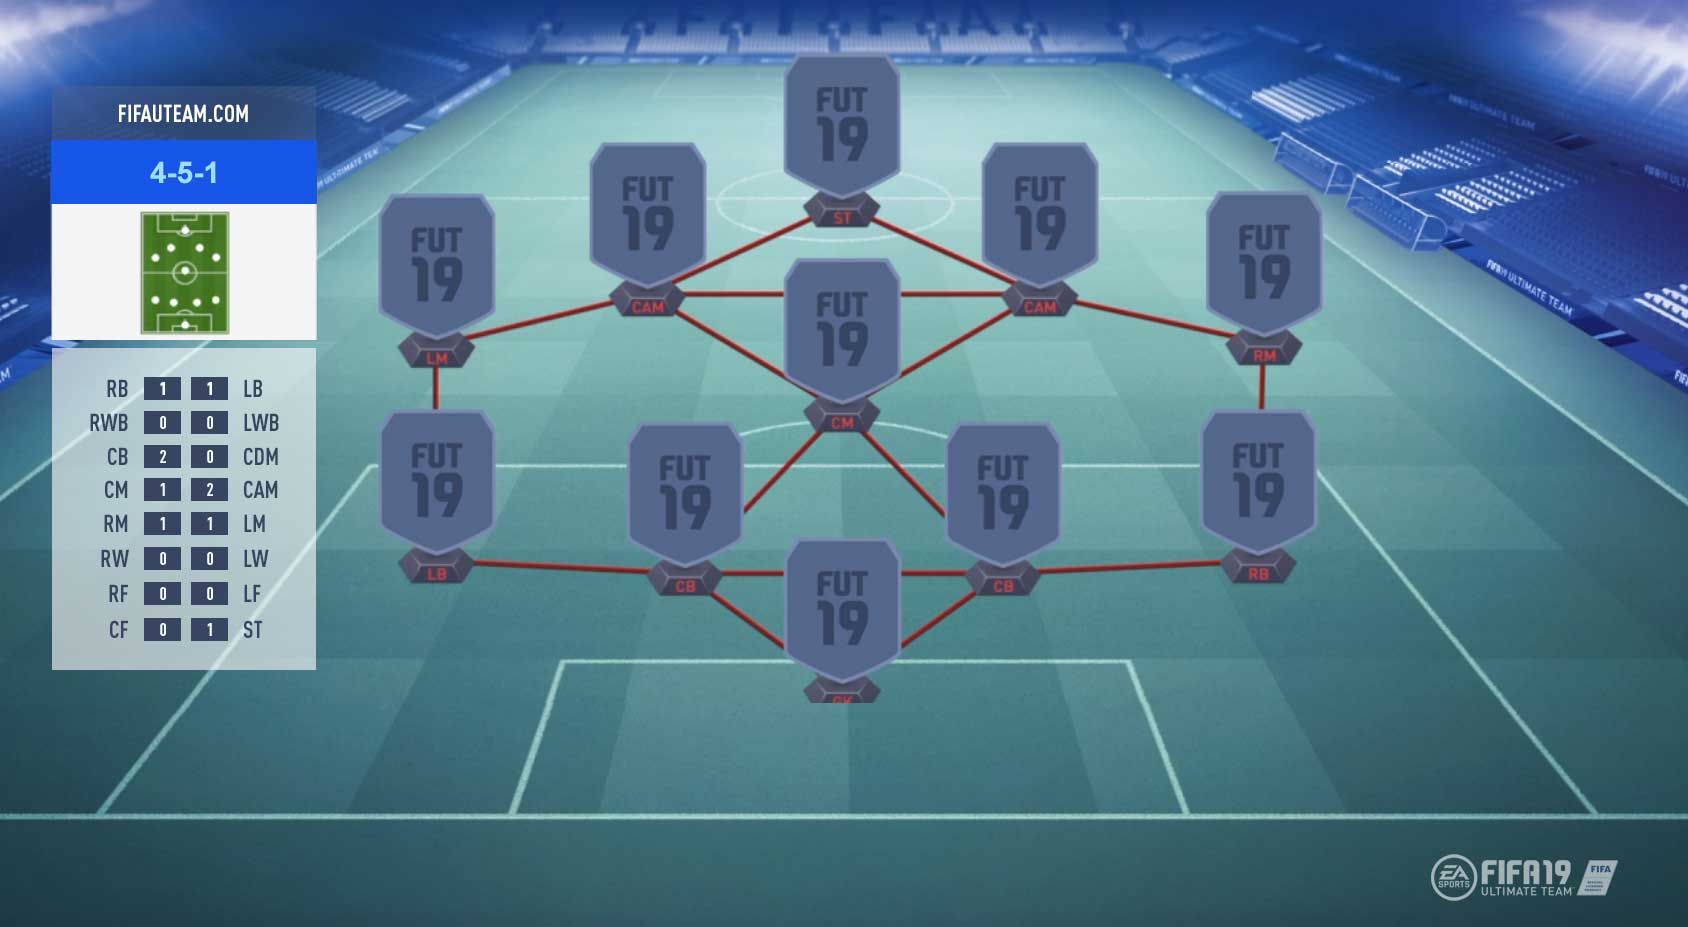 The Best FIFA 19 Formation for FIFA Ultimate Team